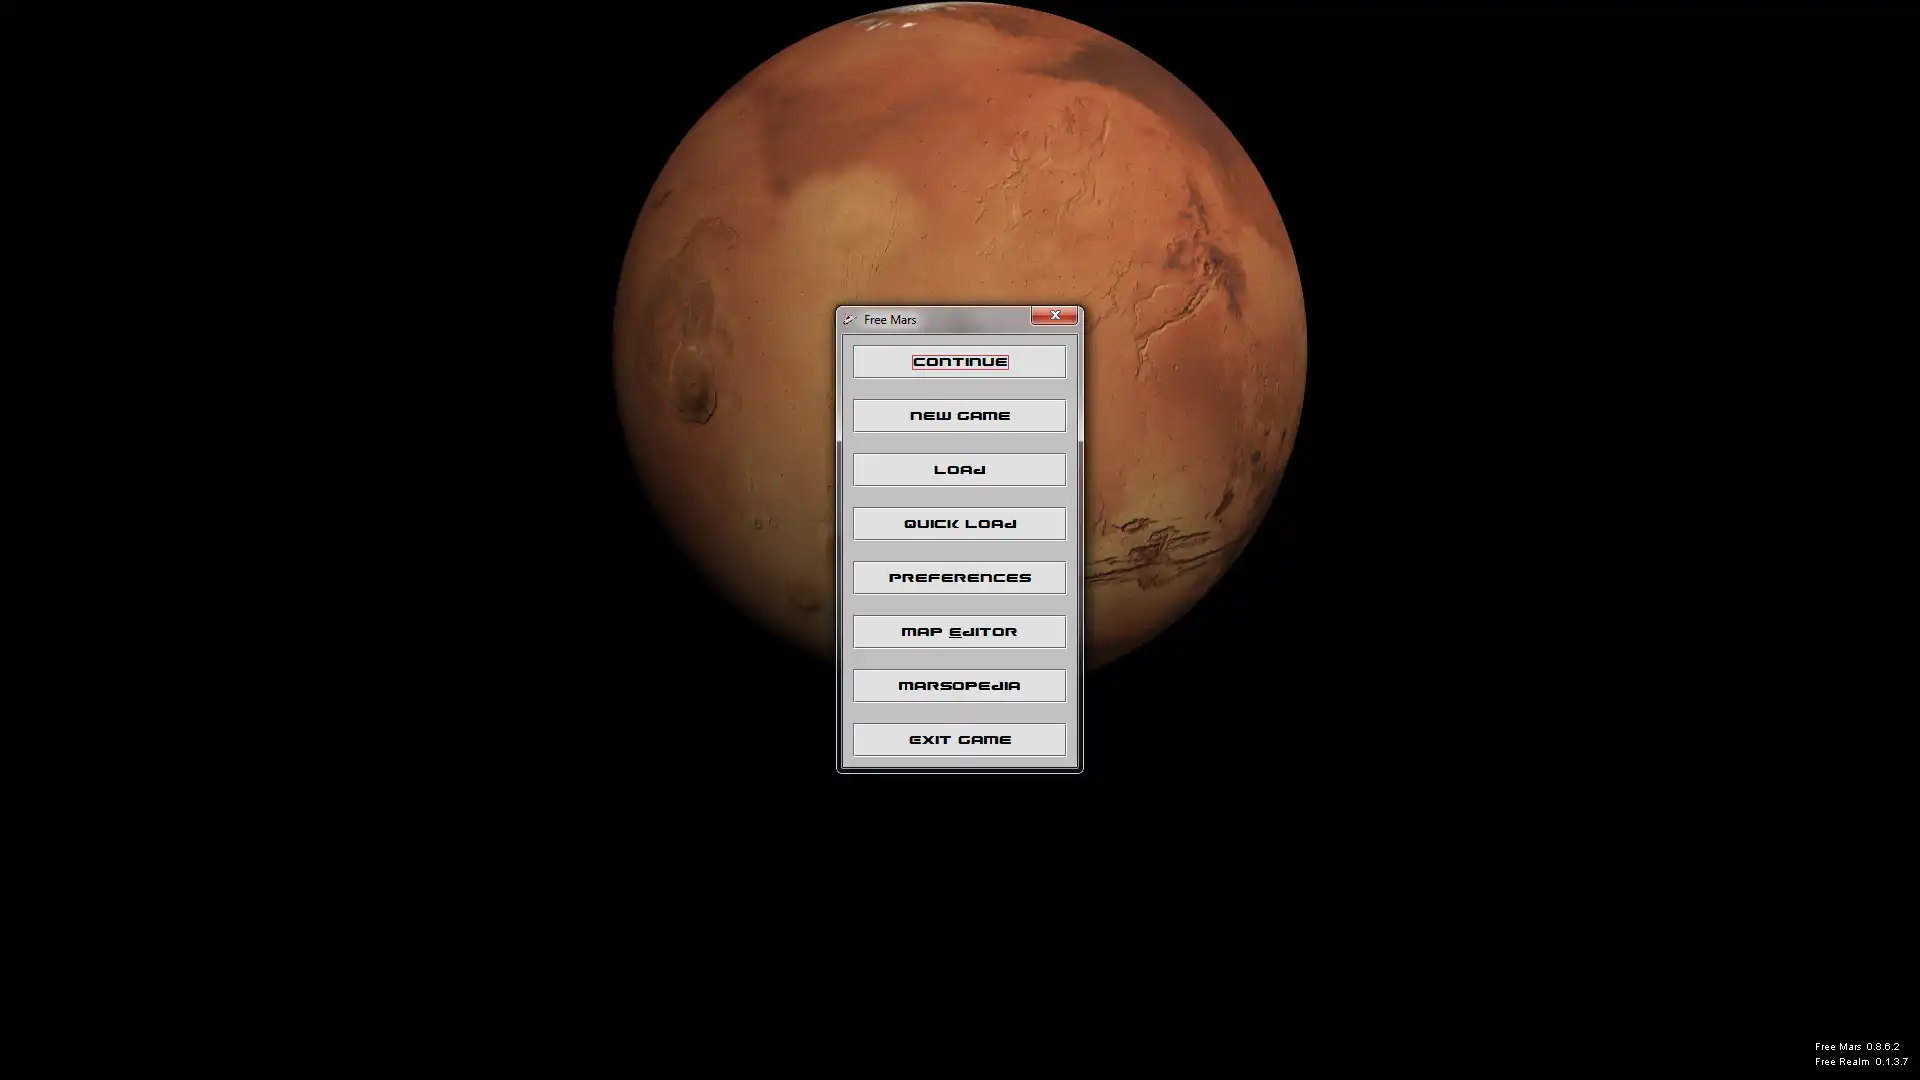 Download web tool or web app Free Mars to run in Linux online